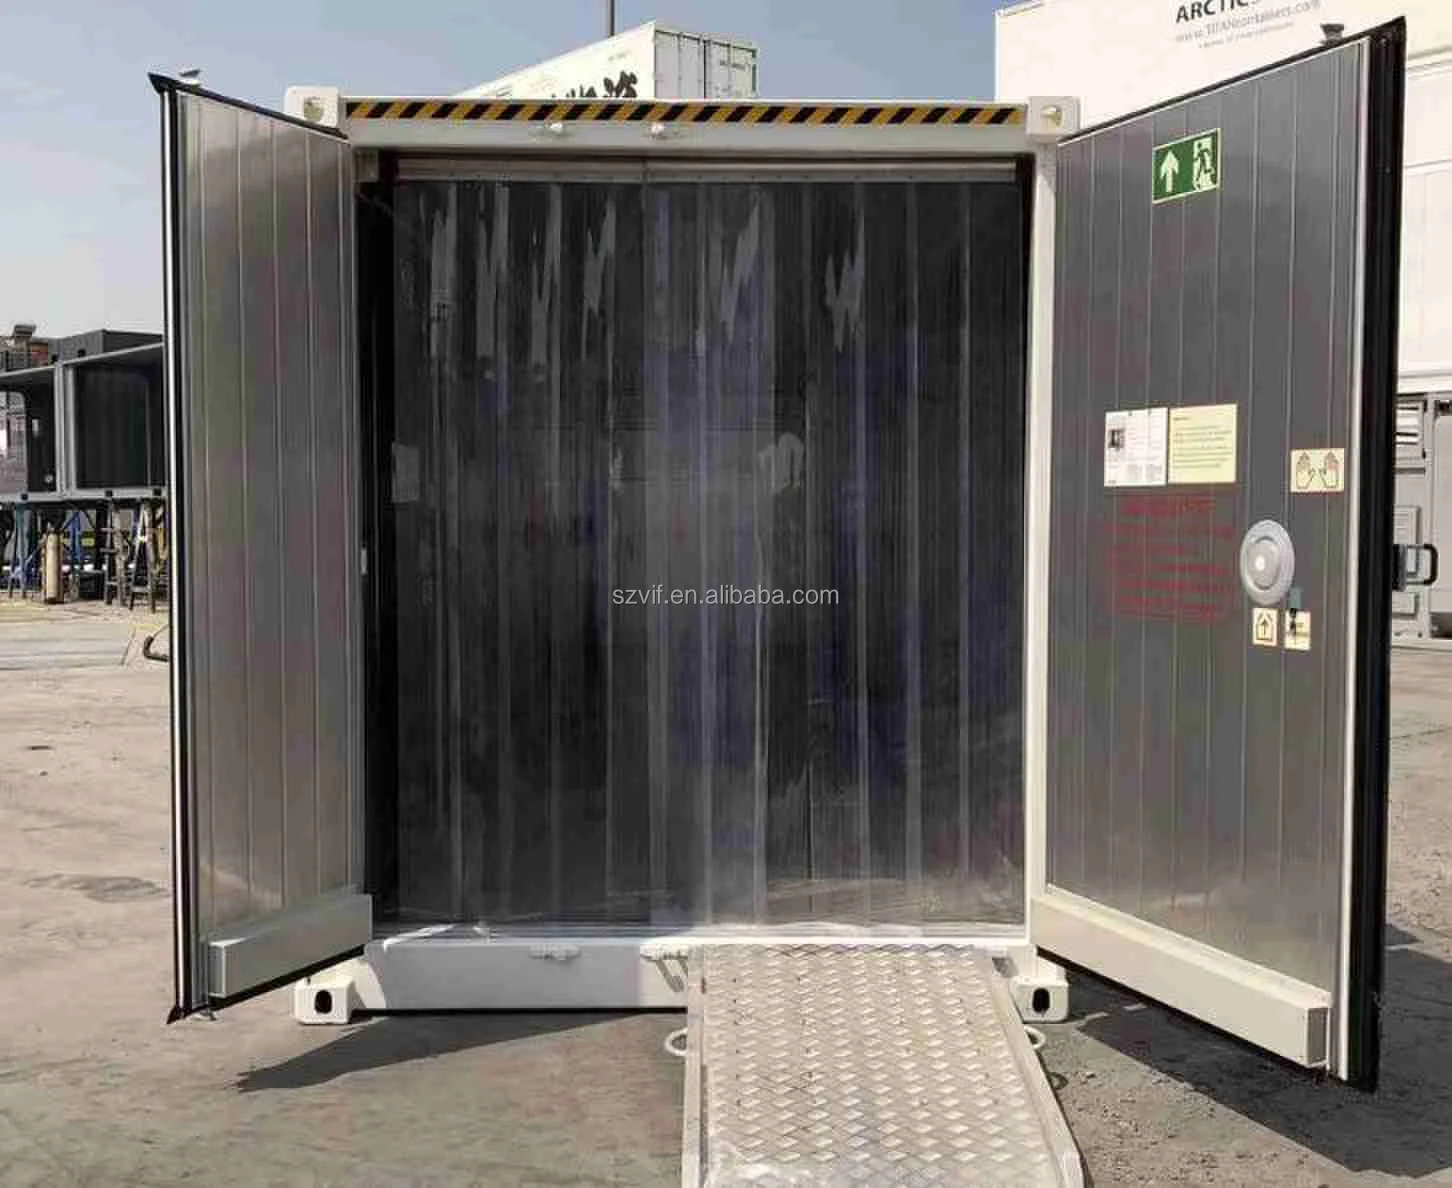 Qingdao Shanghai Refrigerated Hgss T-Type Aluminium Floor Insulated  Container - China Reefer Container, Refrigerated Container